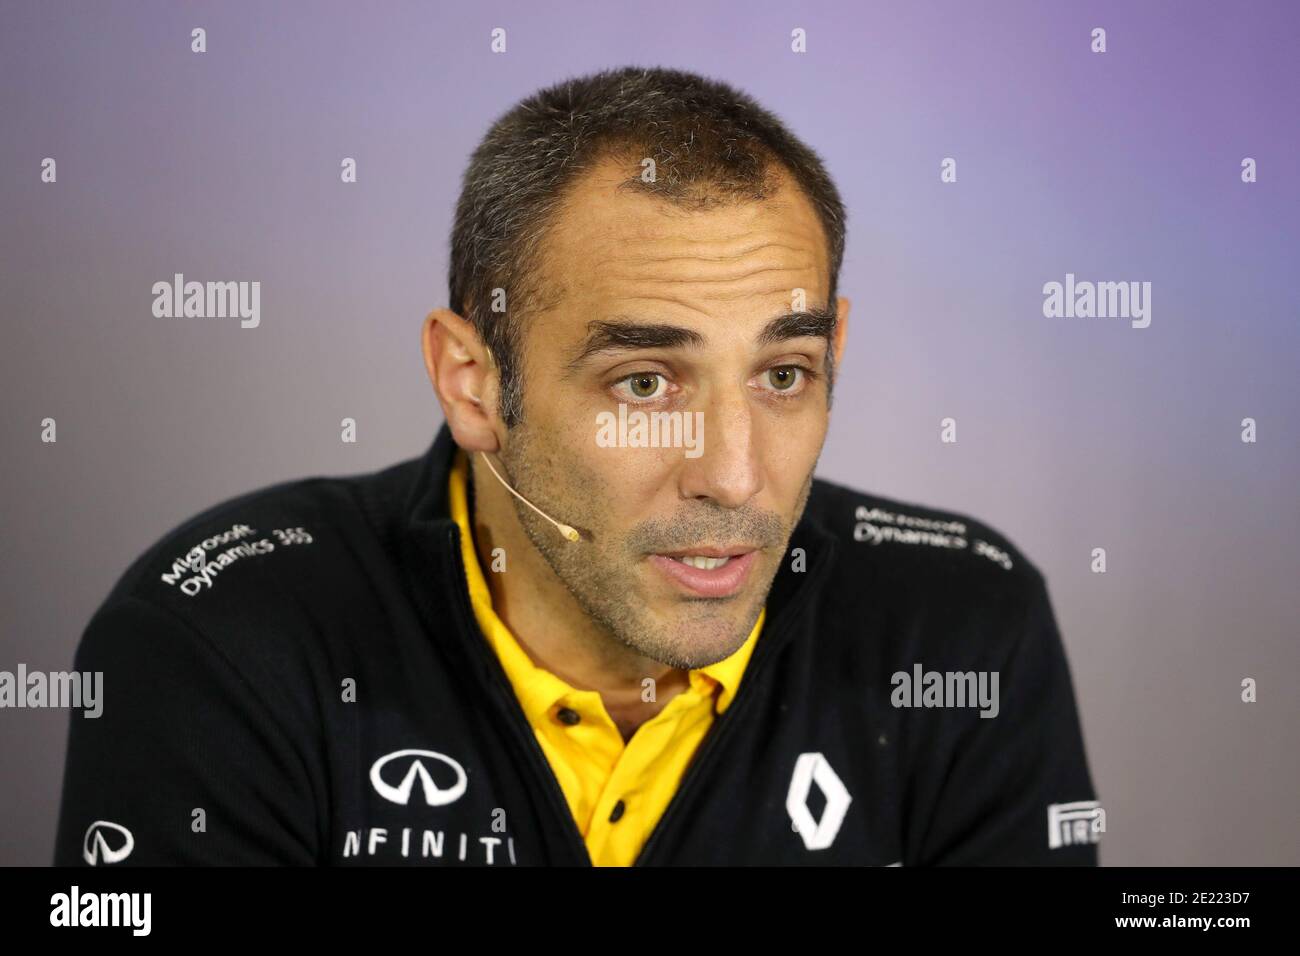 File photo dated 14-07-2017 of Managing Director of Renault Sport F1 Team Cyril Abiteboul. Stock Photo